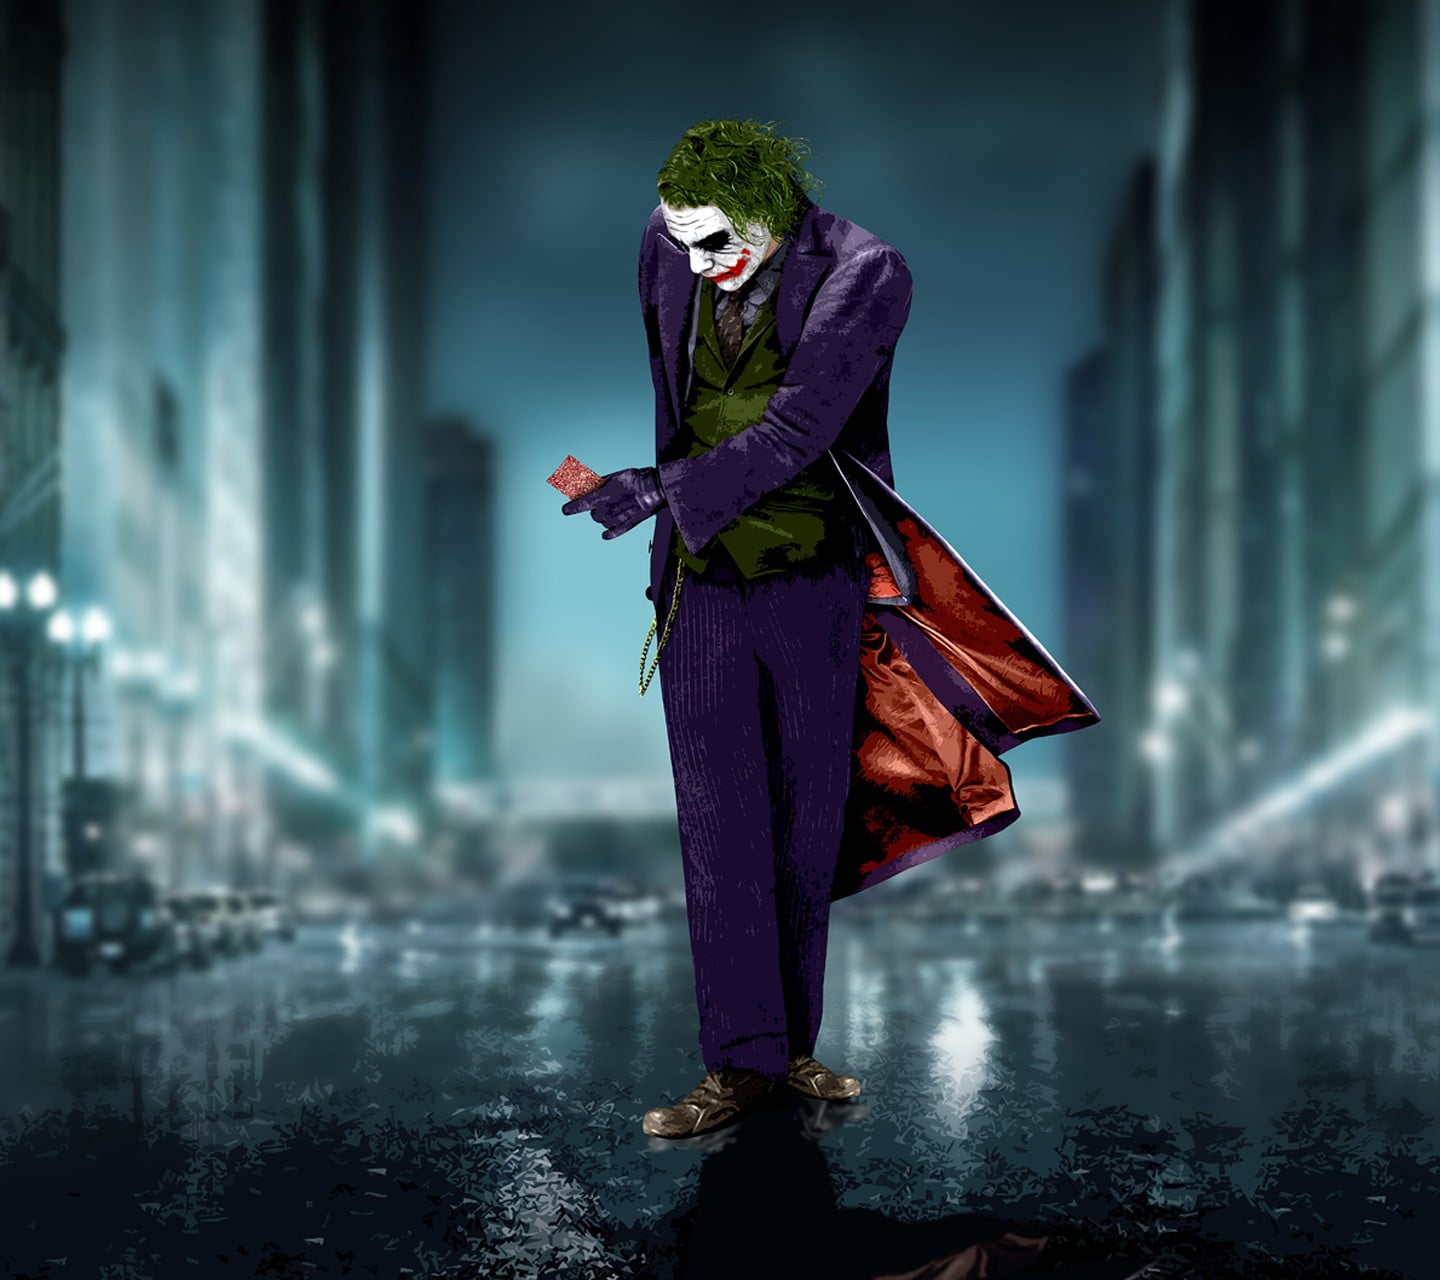 The Joker wallpaper, The Dark Knight, movies, full length, one person